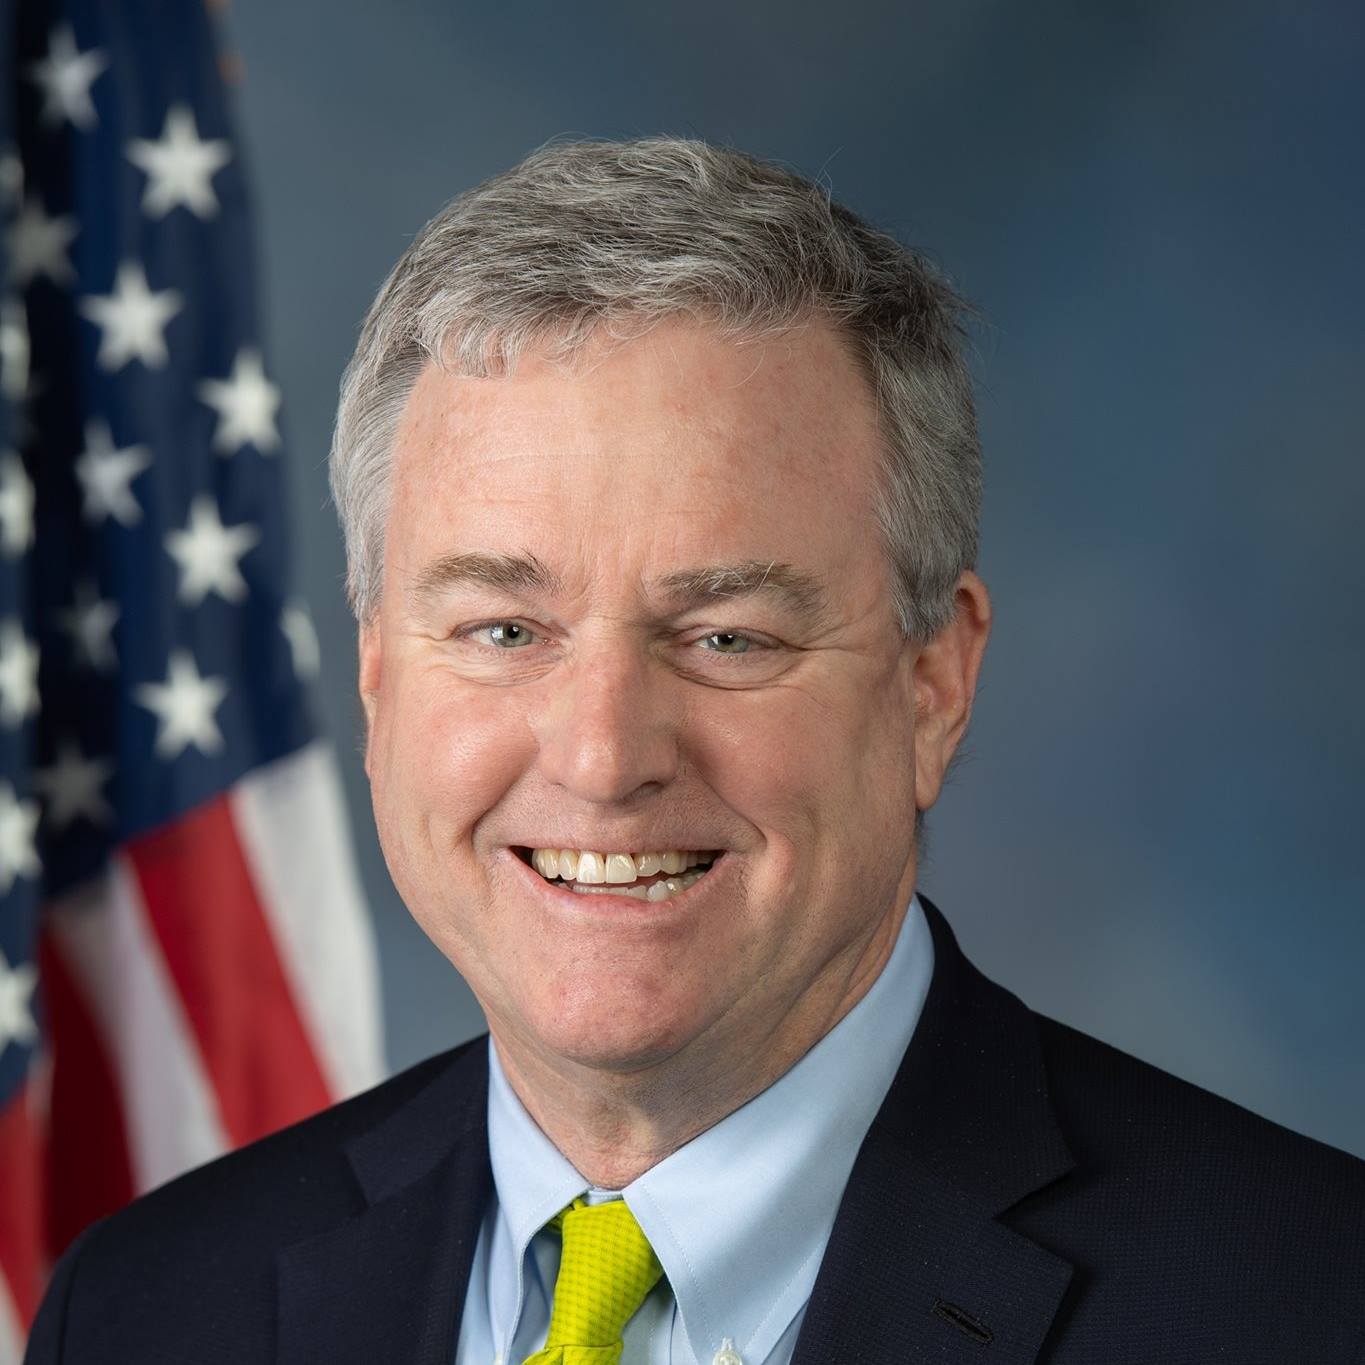 Rep. Trone Supports President’s Vaccine Mandate For Private Employers